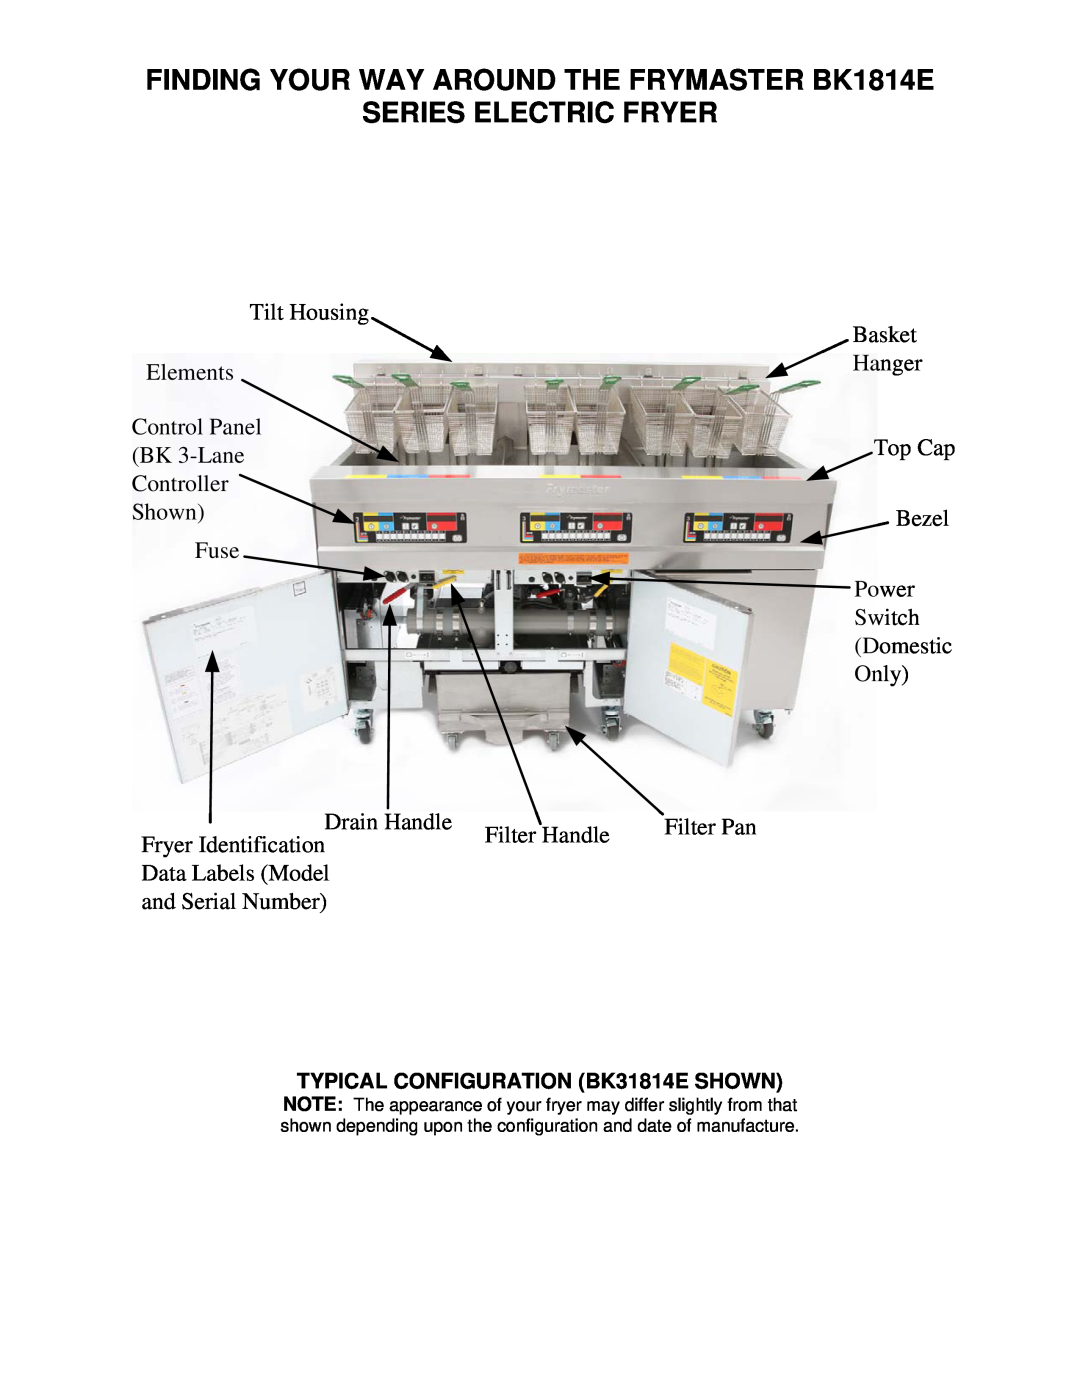 Frymaster operation manual FINDING YOUR WAY AROUND THE FRYMASTER BK1814E SERIES ELECTRIC FRYER 